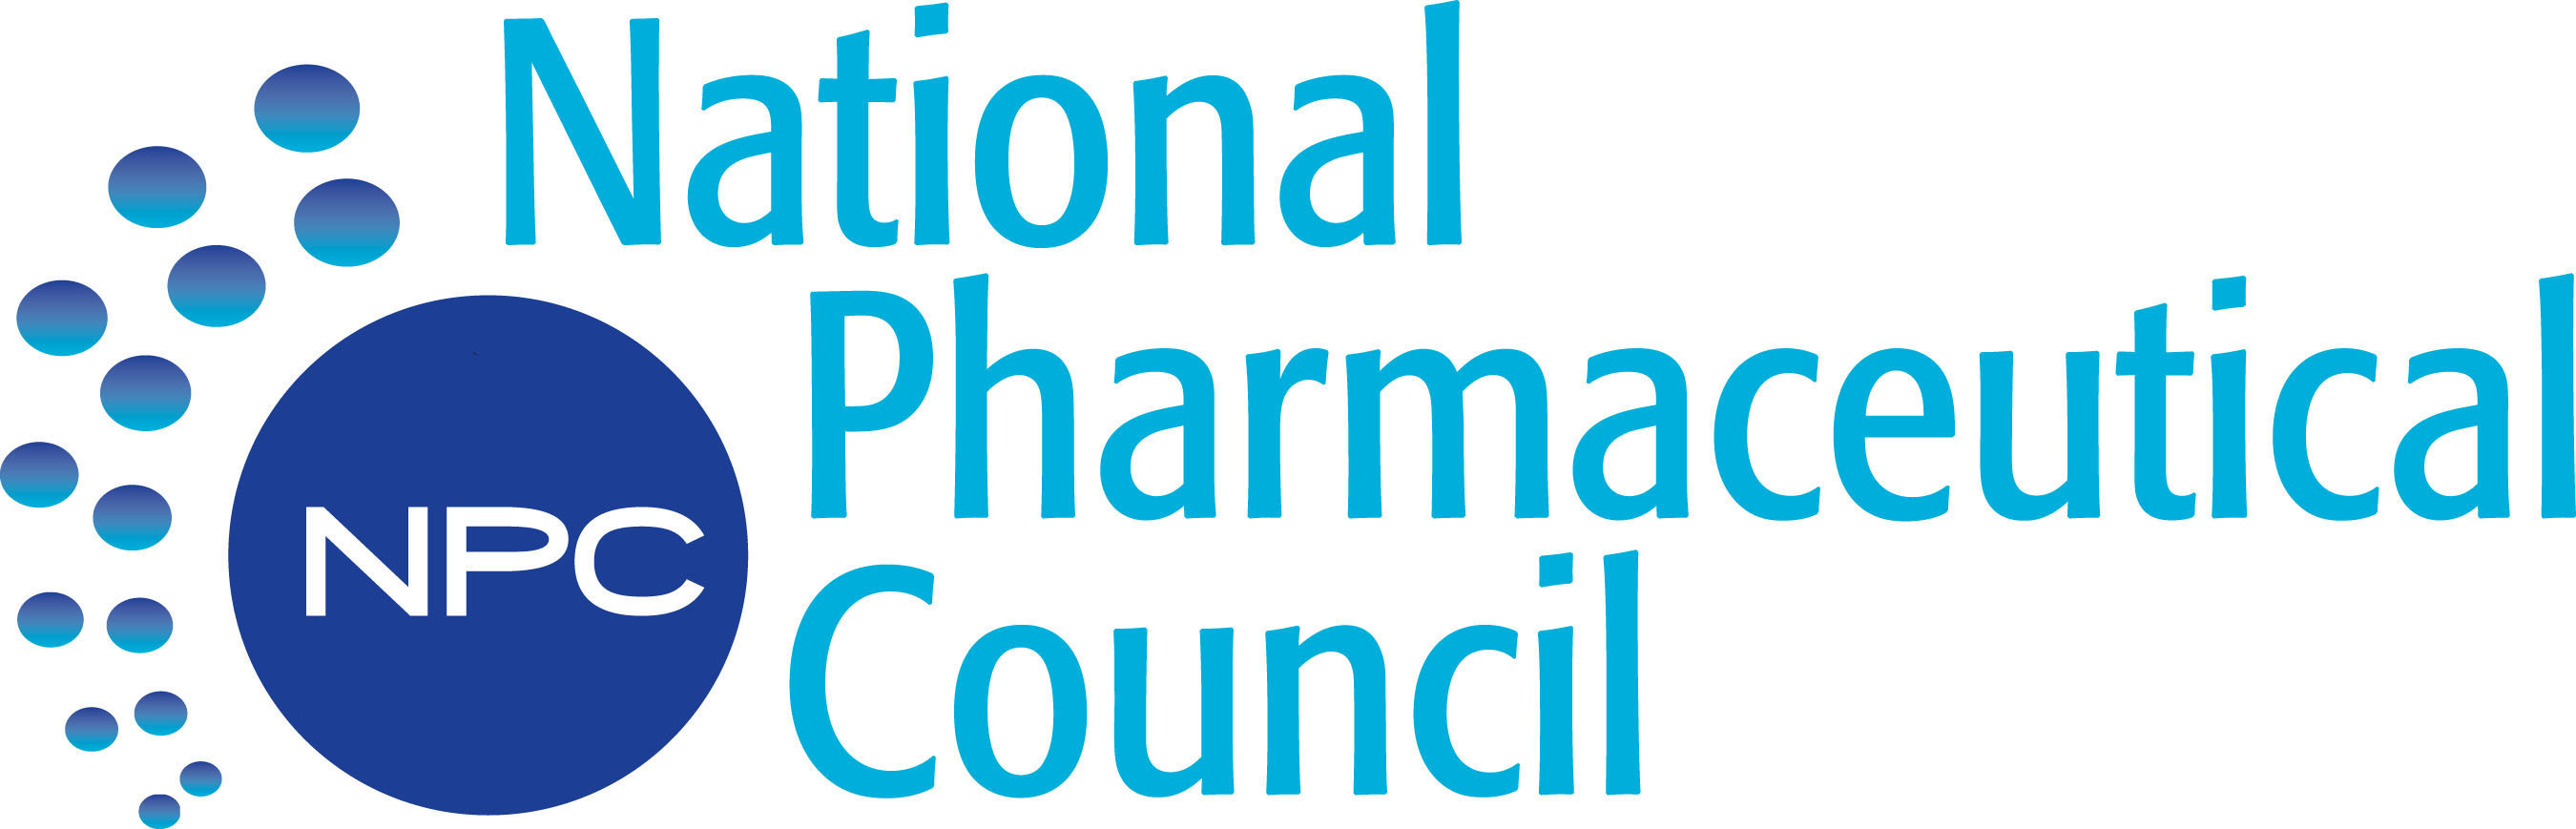 The National Pharmaceutical Council is a Washington, DC-based health care policy research organization.